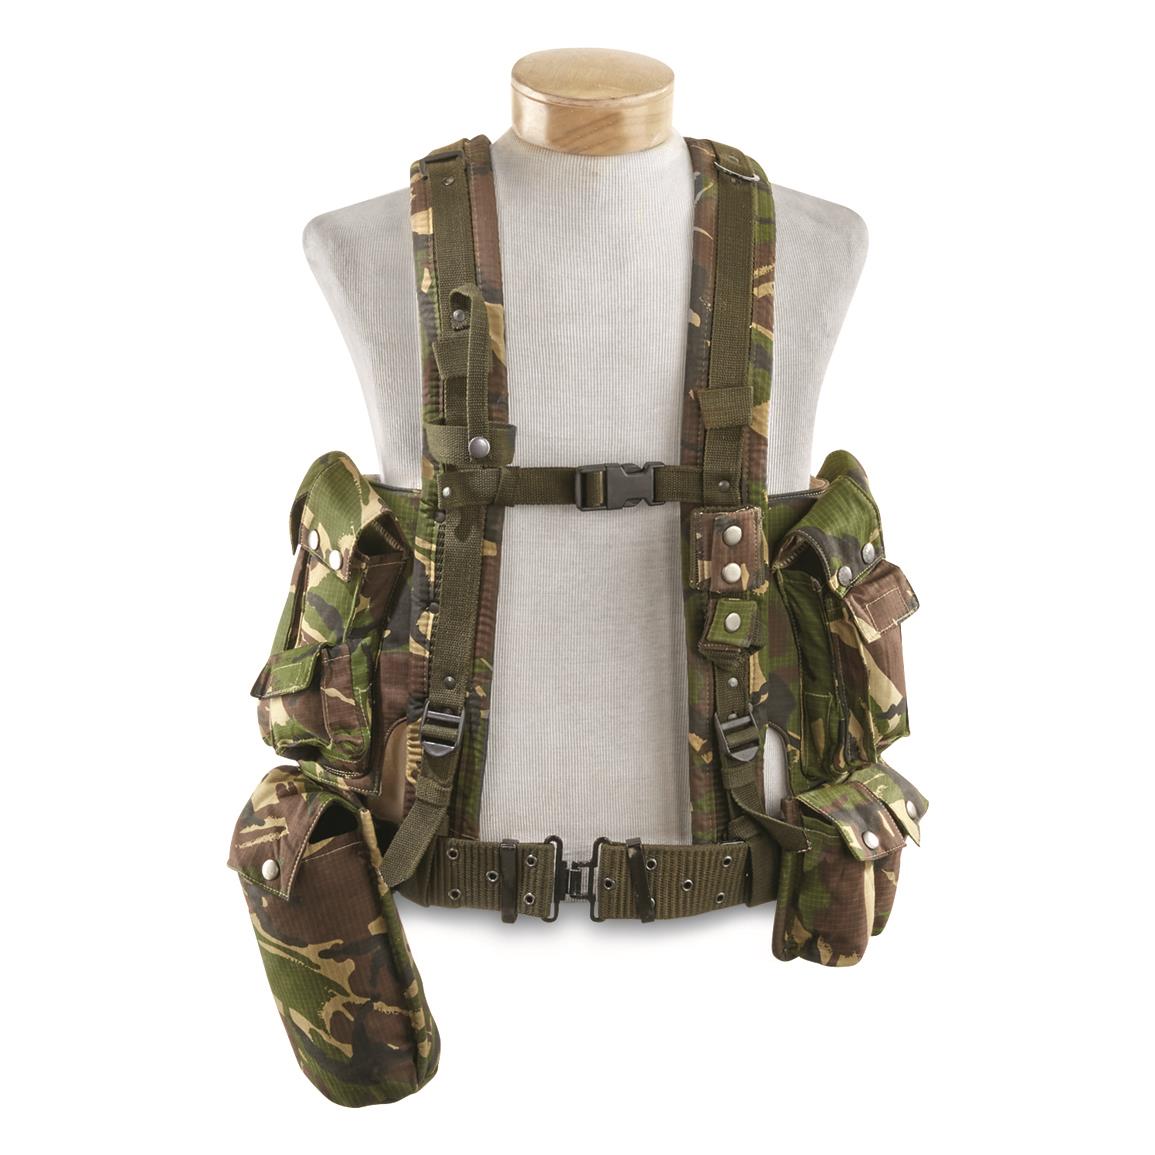 How do you make a reinforced tactical vest to submit?